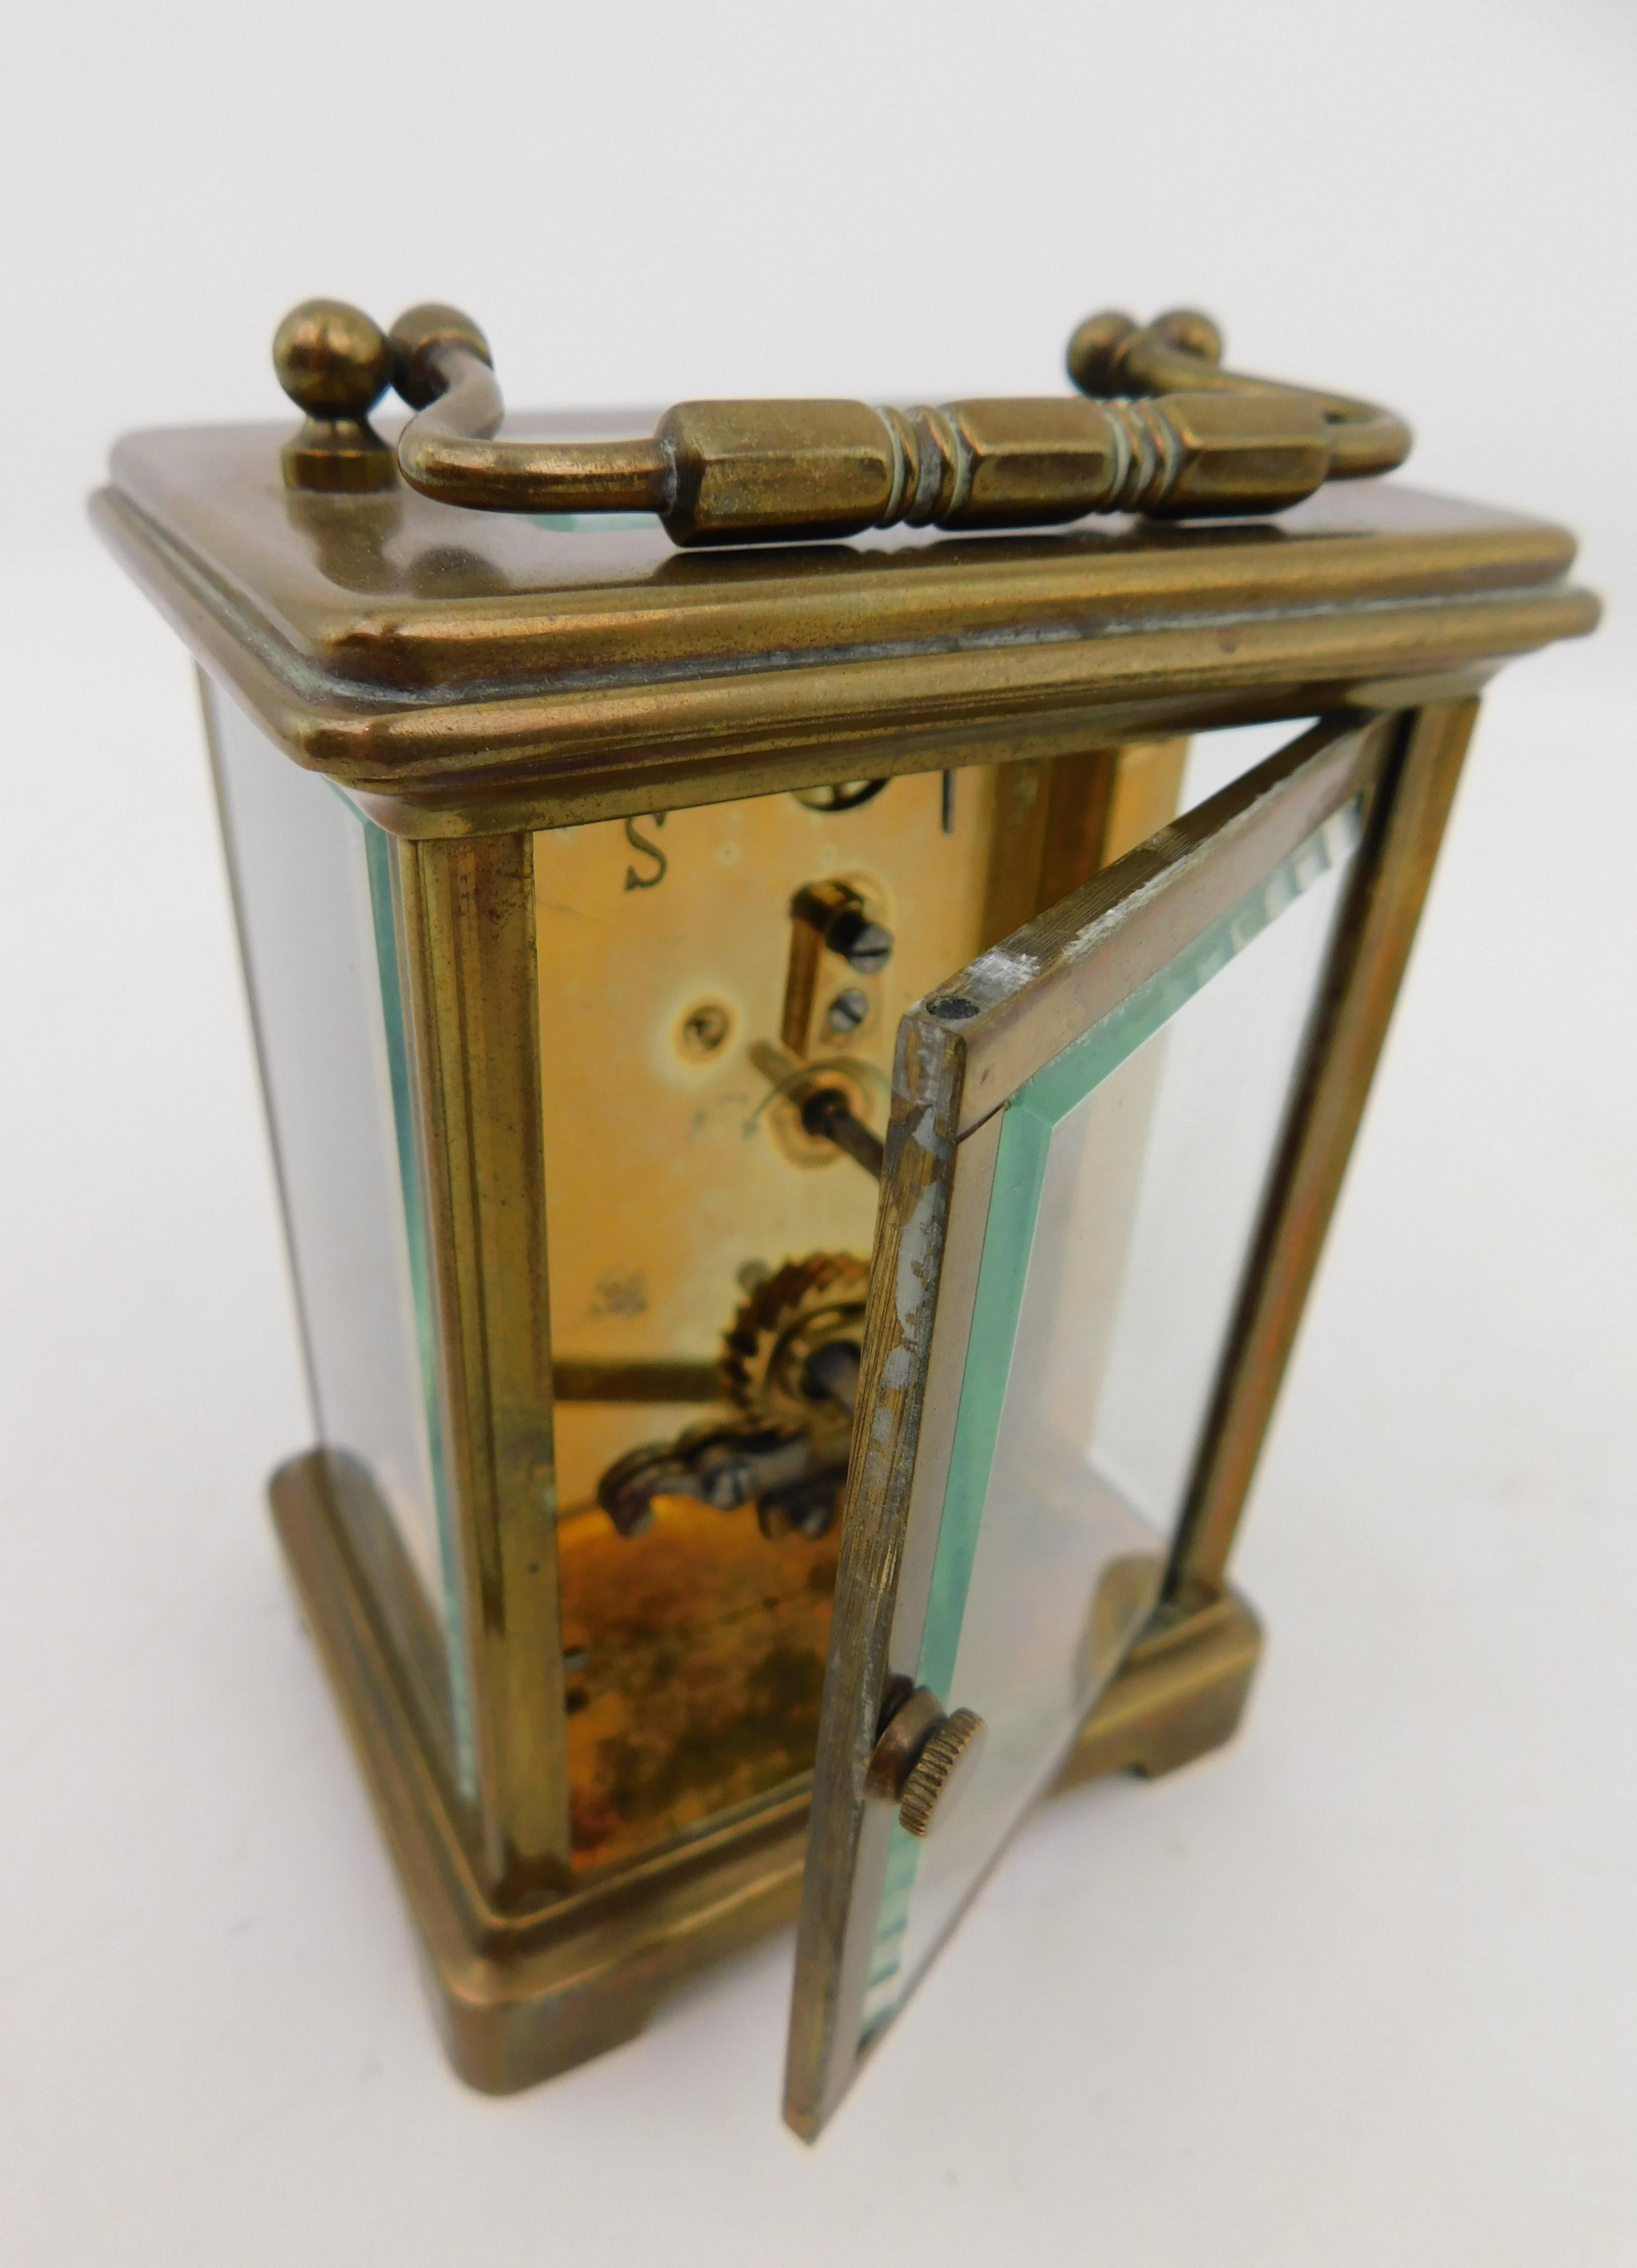 Brass 19th Century Victorian English Carriage Travel Clock in Leather Case with Key For Sale